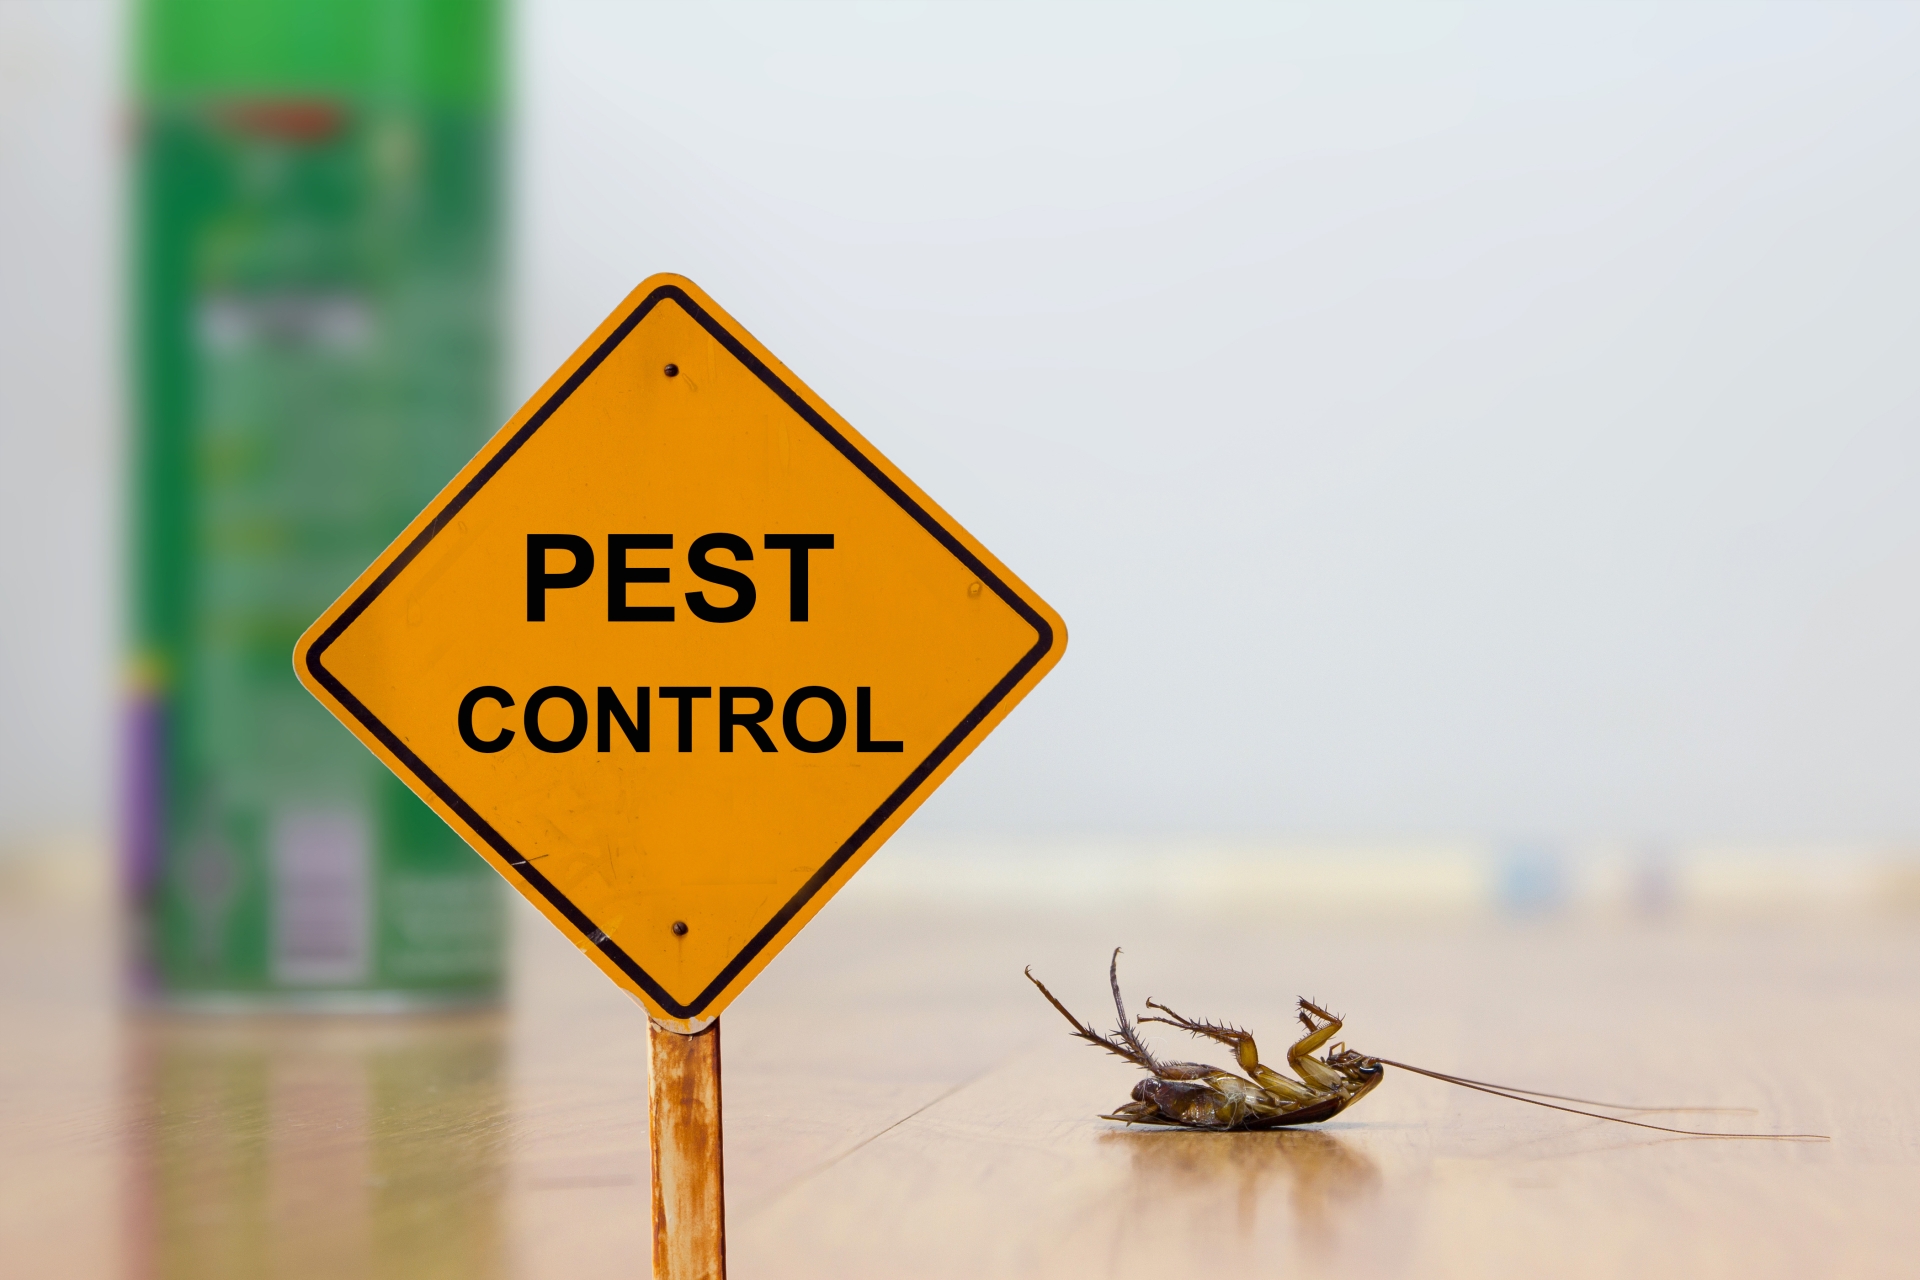 24 Hour Pest Control, Pest Control in Rush Green, RM7. Call Now 020 8166 9746